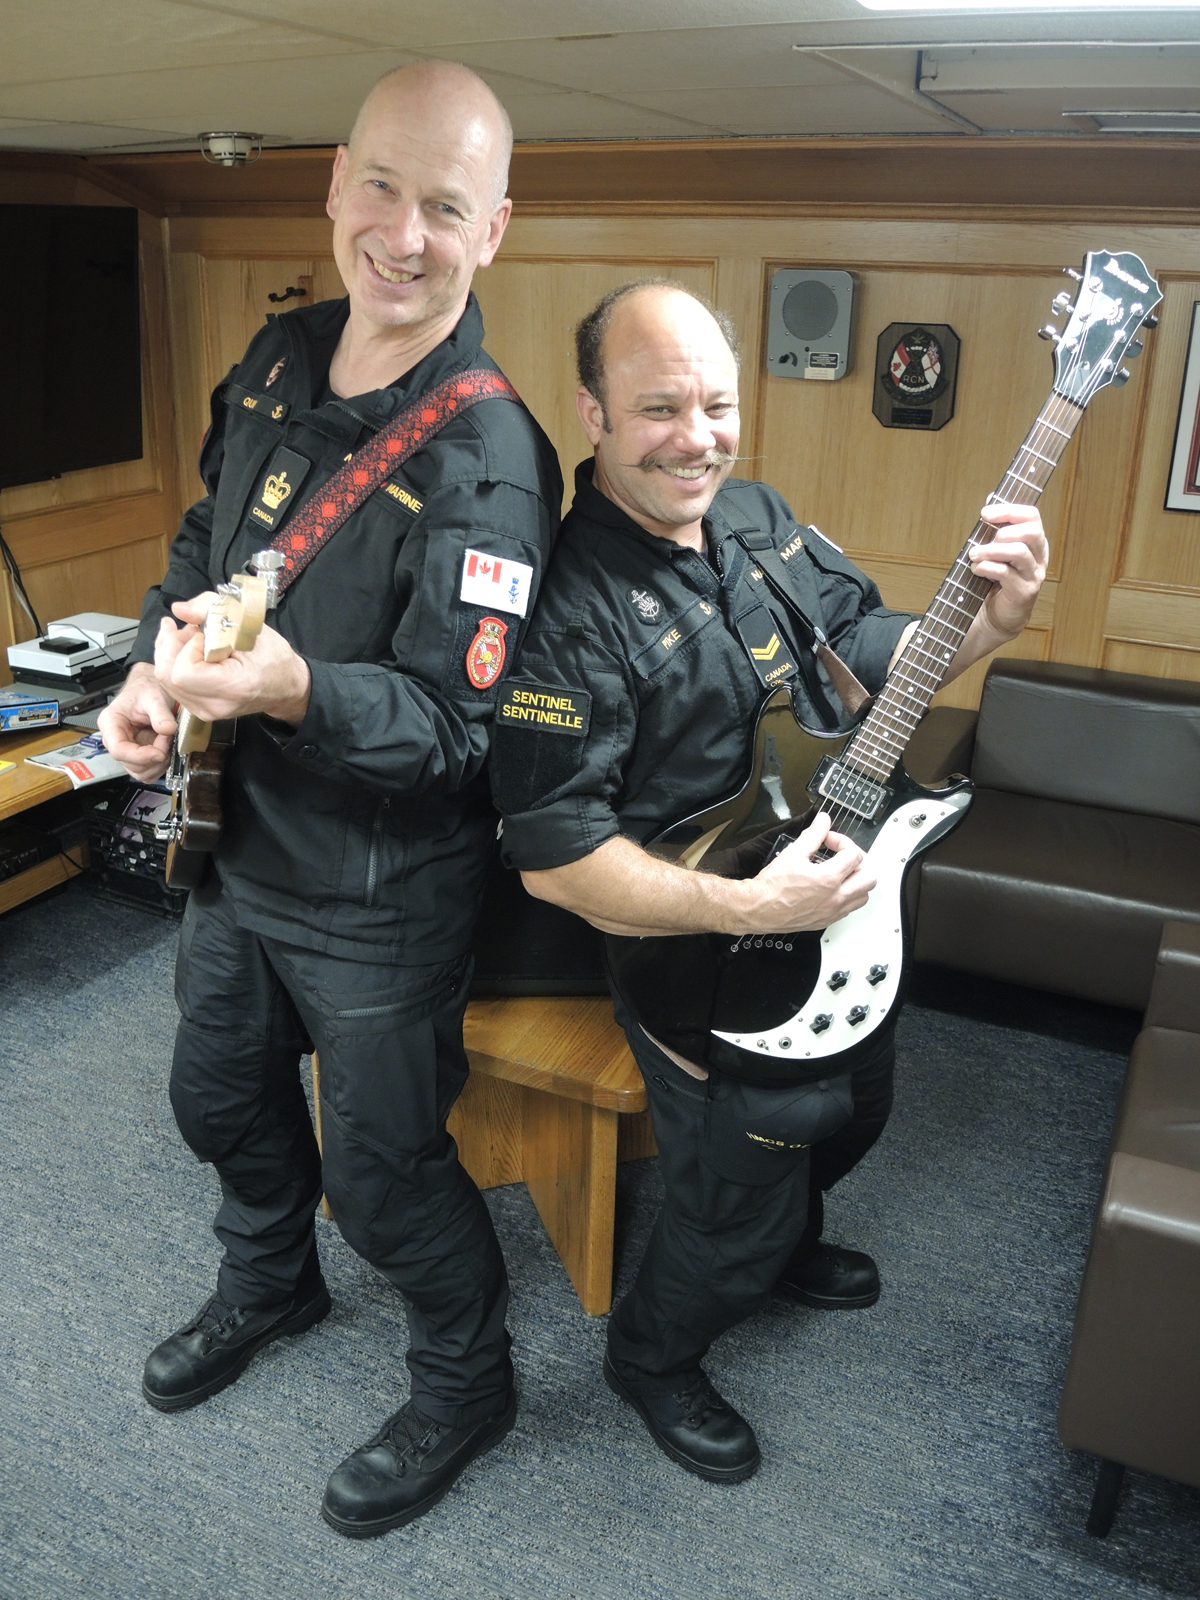 Petty Officer First Class Paul Quin and Sailor First Class Syl Pike practise playing their guitars in the Chief and Petty Officers' Mess aboard HMCS Ottawa. The two sailors have launched a program to provide musical instruments to sailors aboard ship during its upcoming deployment to the Indo-Pacific region. Photo: Peter Mallett/Lookout Newspaper.  
